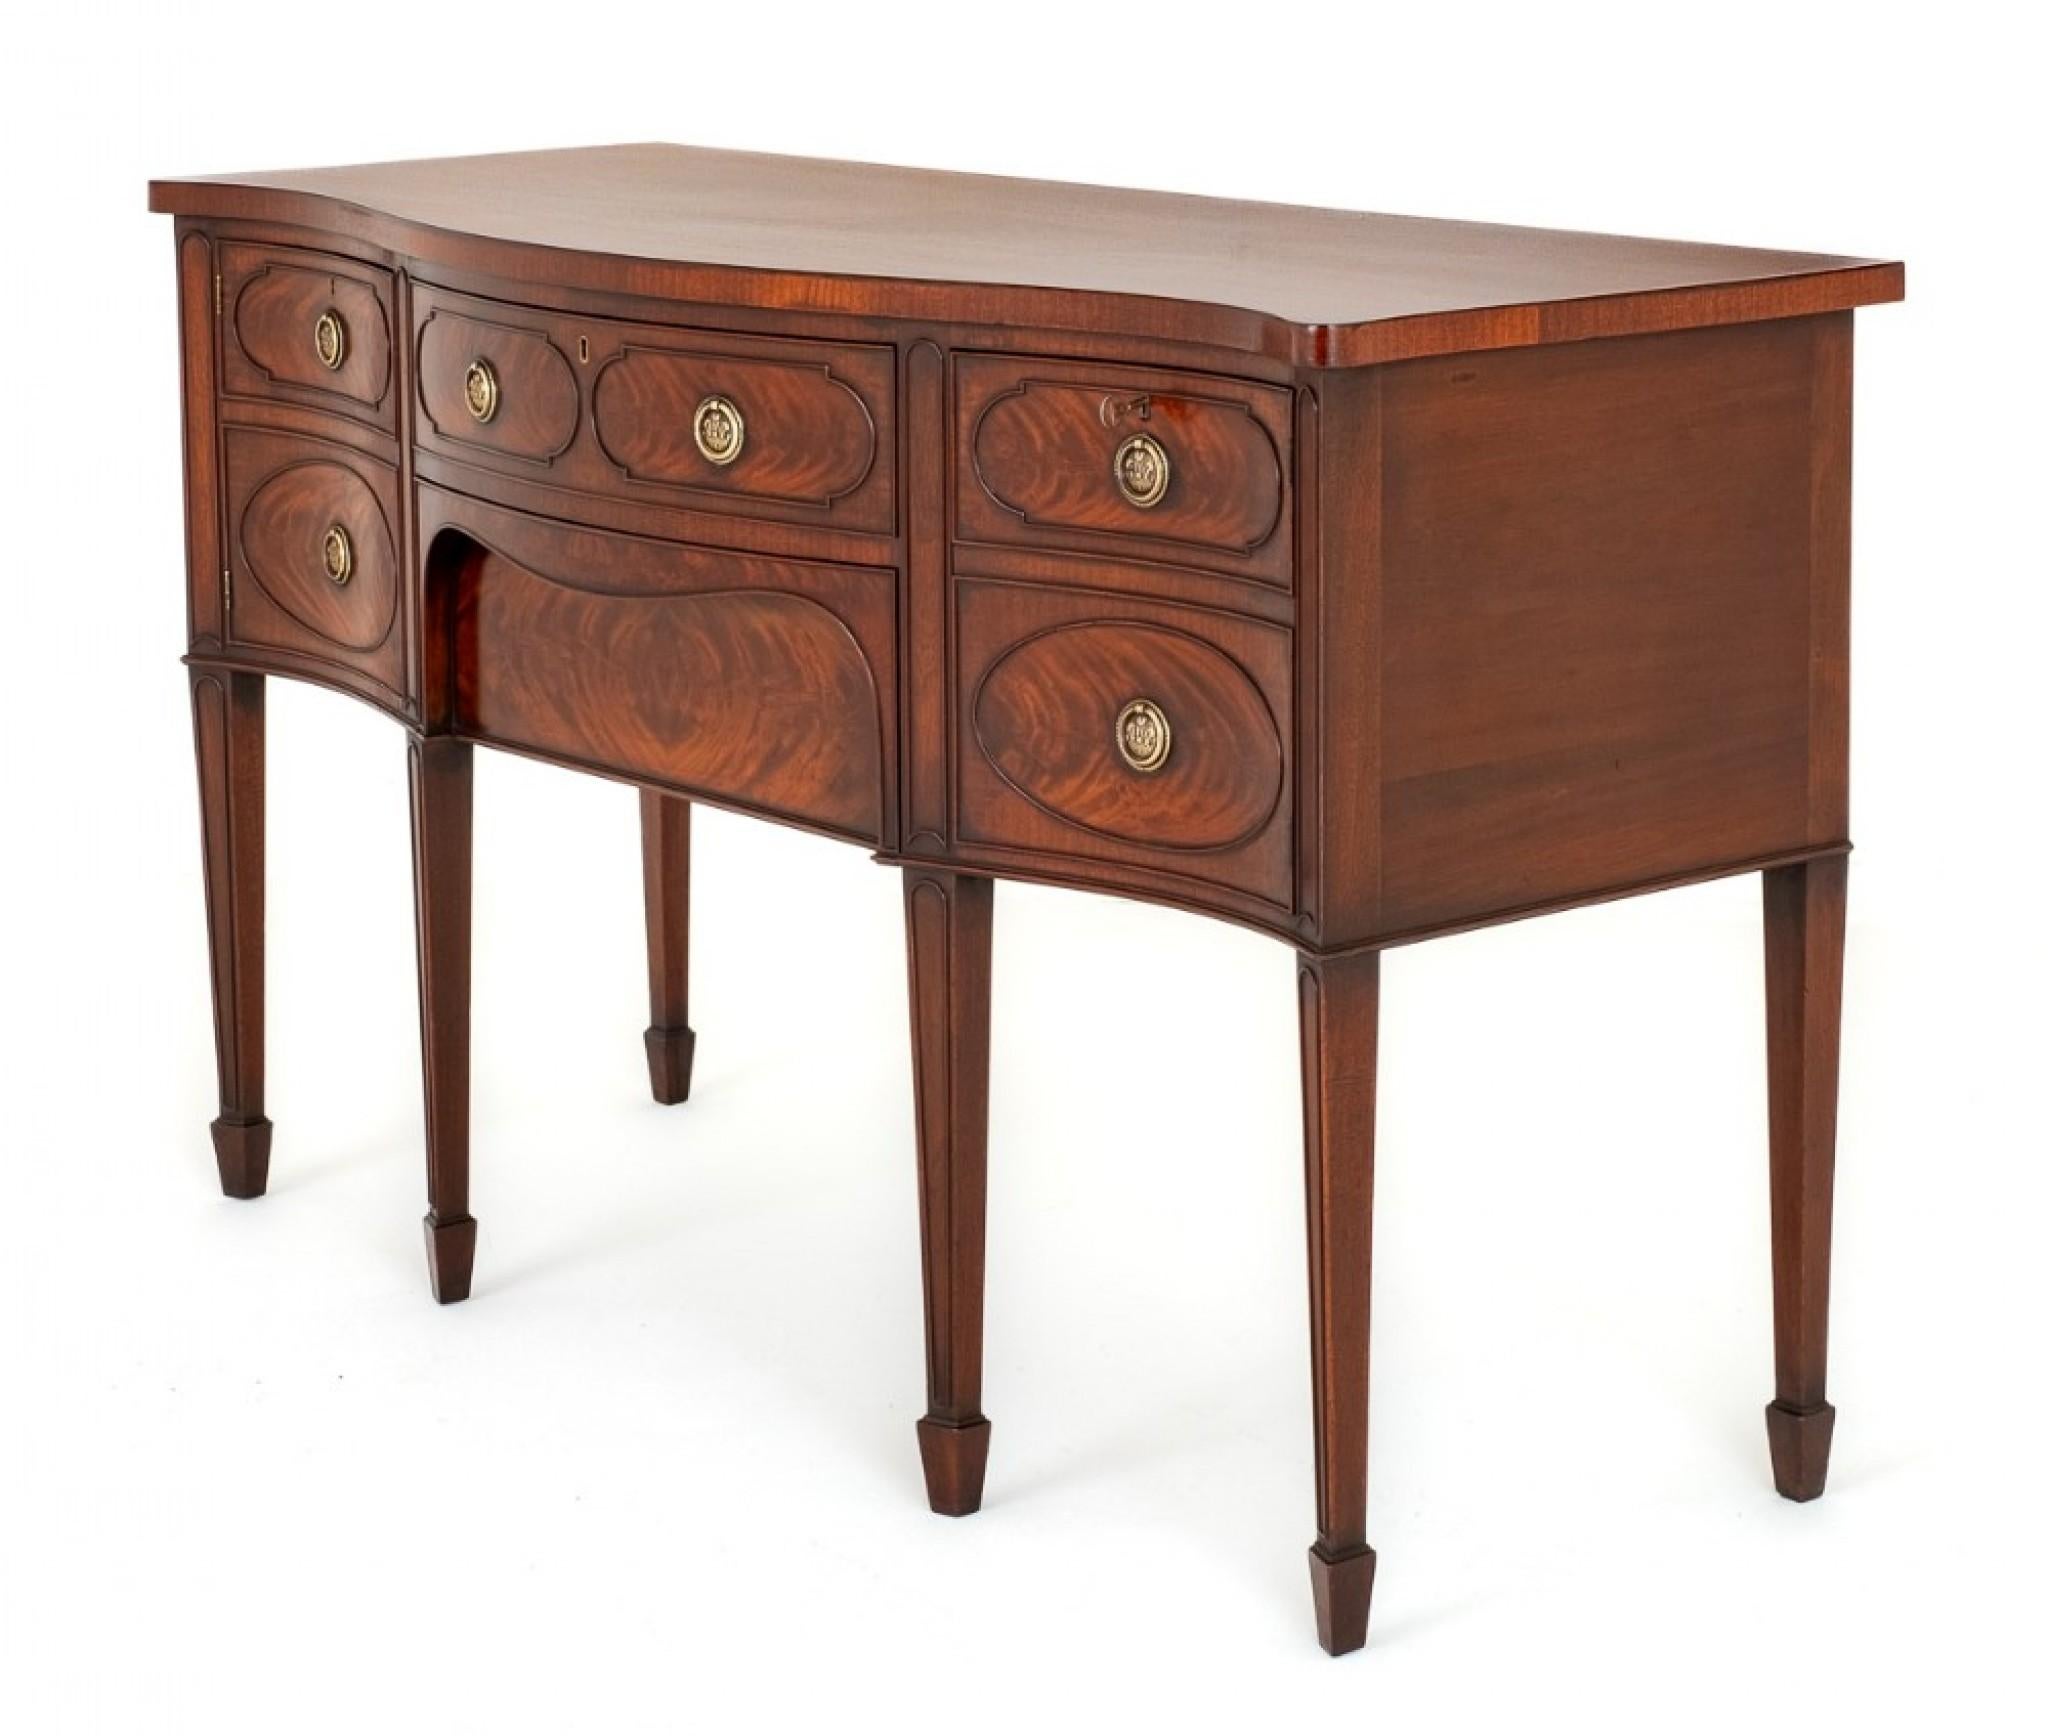 This Quality Sideboard is of a Serpentine Form.
Having an Arrangement of 2 Oak Lined Drawers and 2 Cupboards.
Circa 1800
The Drawers and Cupboard Fronts Feature Wonderful Matched Flame Mahogany Veneers and Applied Moldings and Retain Their